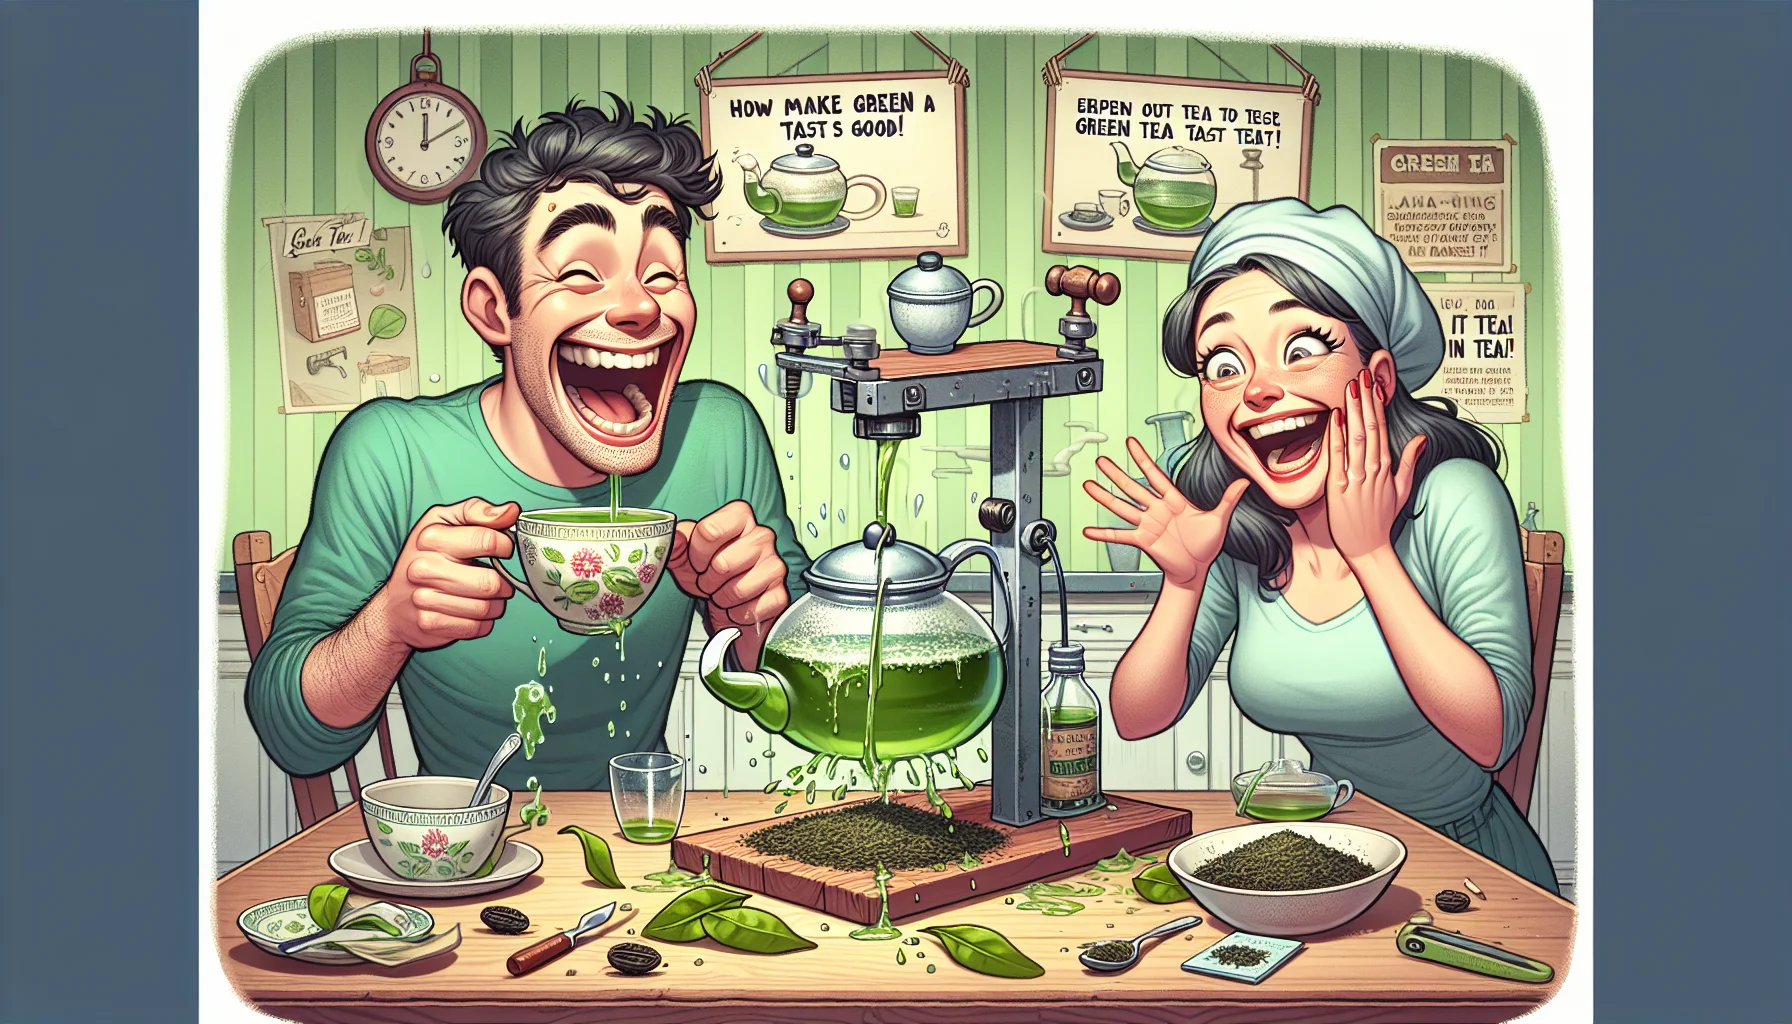 Illustrate a humorous and realistic scene of people enjoying the taste of green tea. Include a Caucasian man laughing heartily while sipping green tea from a decorative cup. Next to him, a Hispanic woman is comically exaggerating her surprise and delight as she tastes the tea. They are standing in a cozy kitchen, with various tea accessories scattered on a wooden table. In the background, a teapot is pouring tea into a cup by itself due to a silly contraption with pulleys and gears. On the wall, there are humorous instructions on how to make green tea taste good. Let this scene inspire people to enjoy green tea.